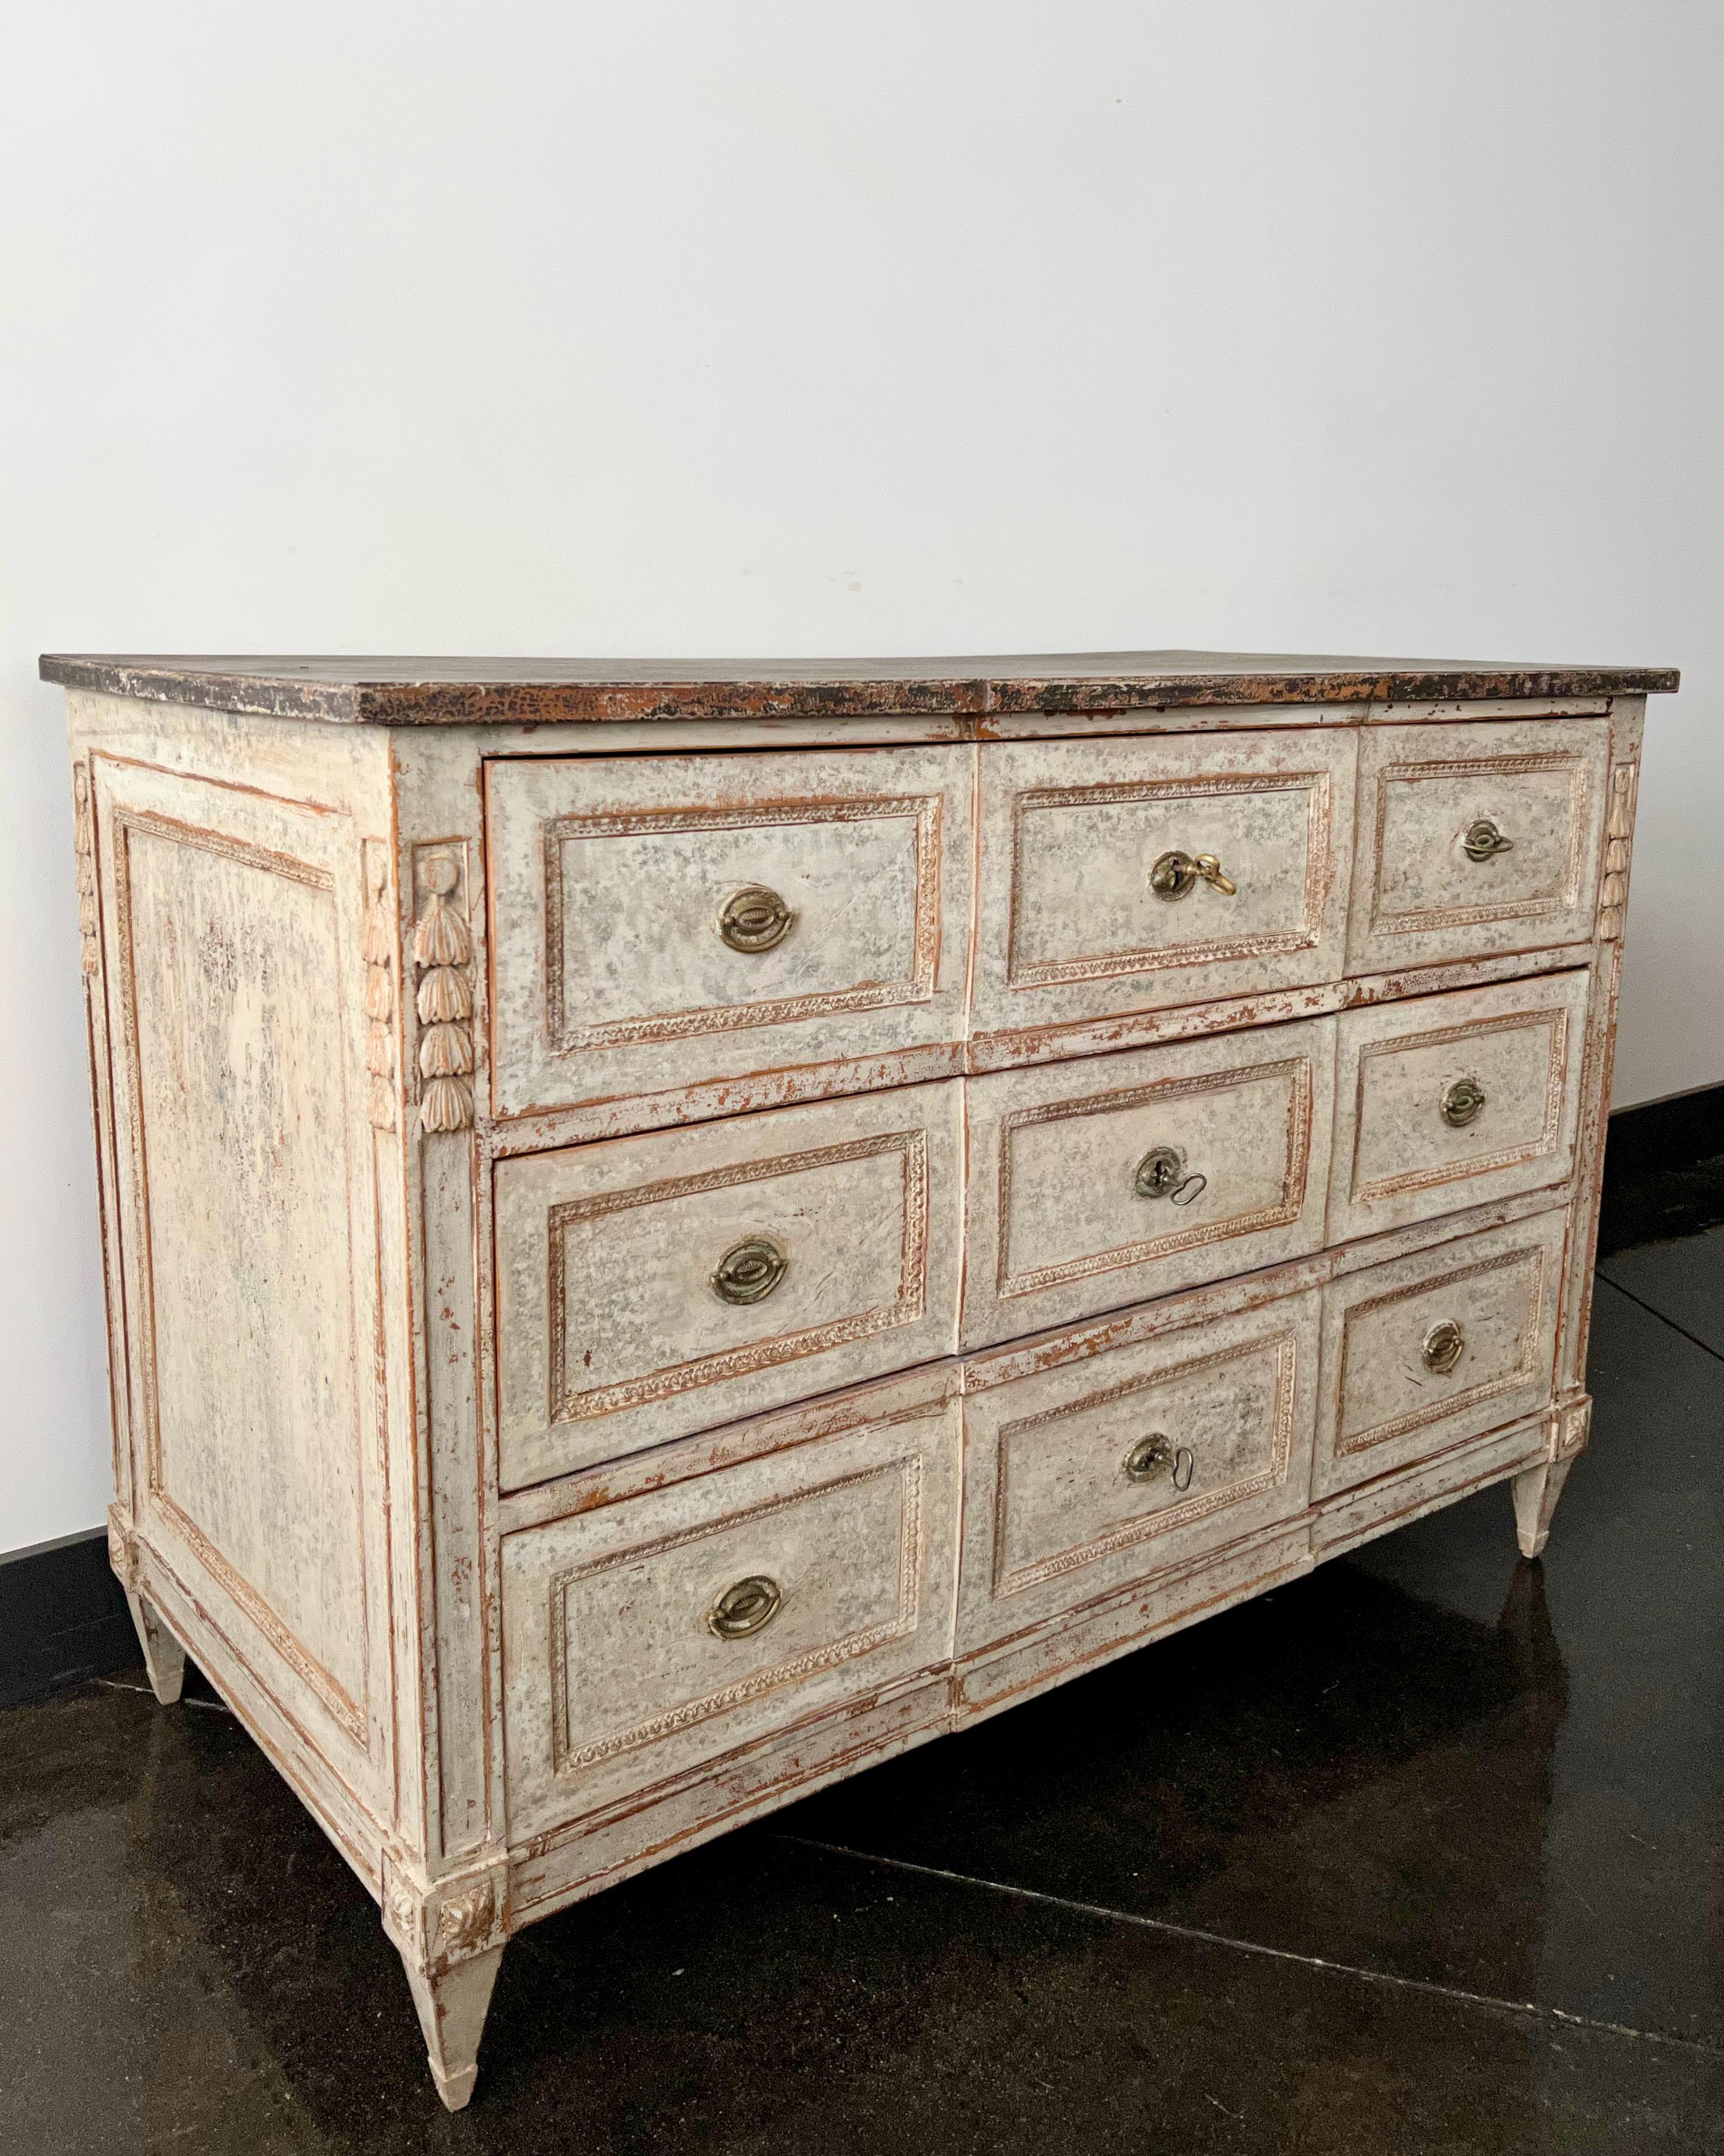 An exquisite 18th century French Louis XVI painted commode with richly carved drawer fronts, decoratively carved corner posts and paneled sides and beautiful original hardware,
More than ever, we selected the best, the rarest, the unusual, the